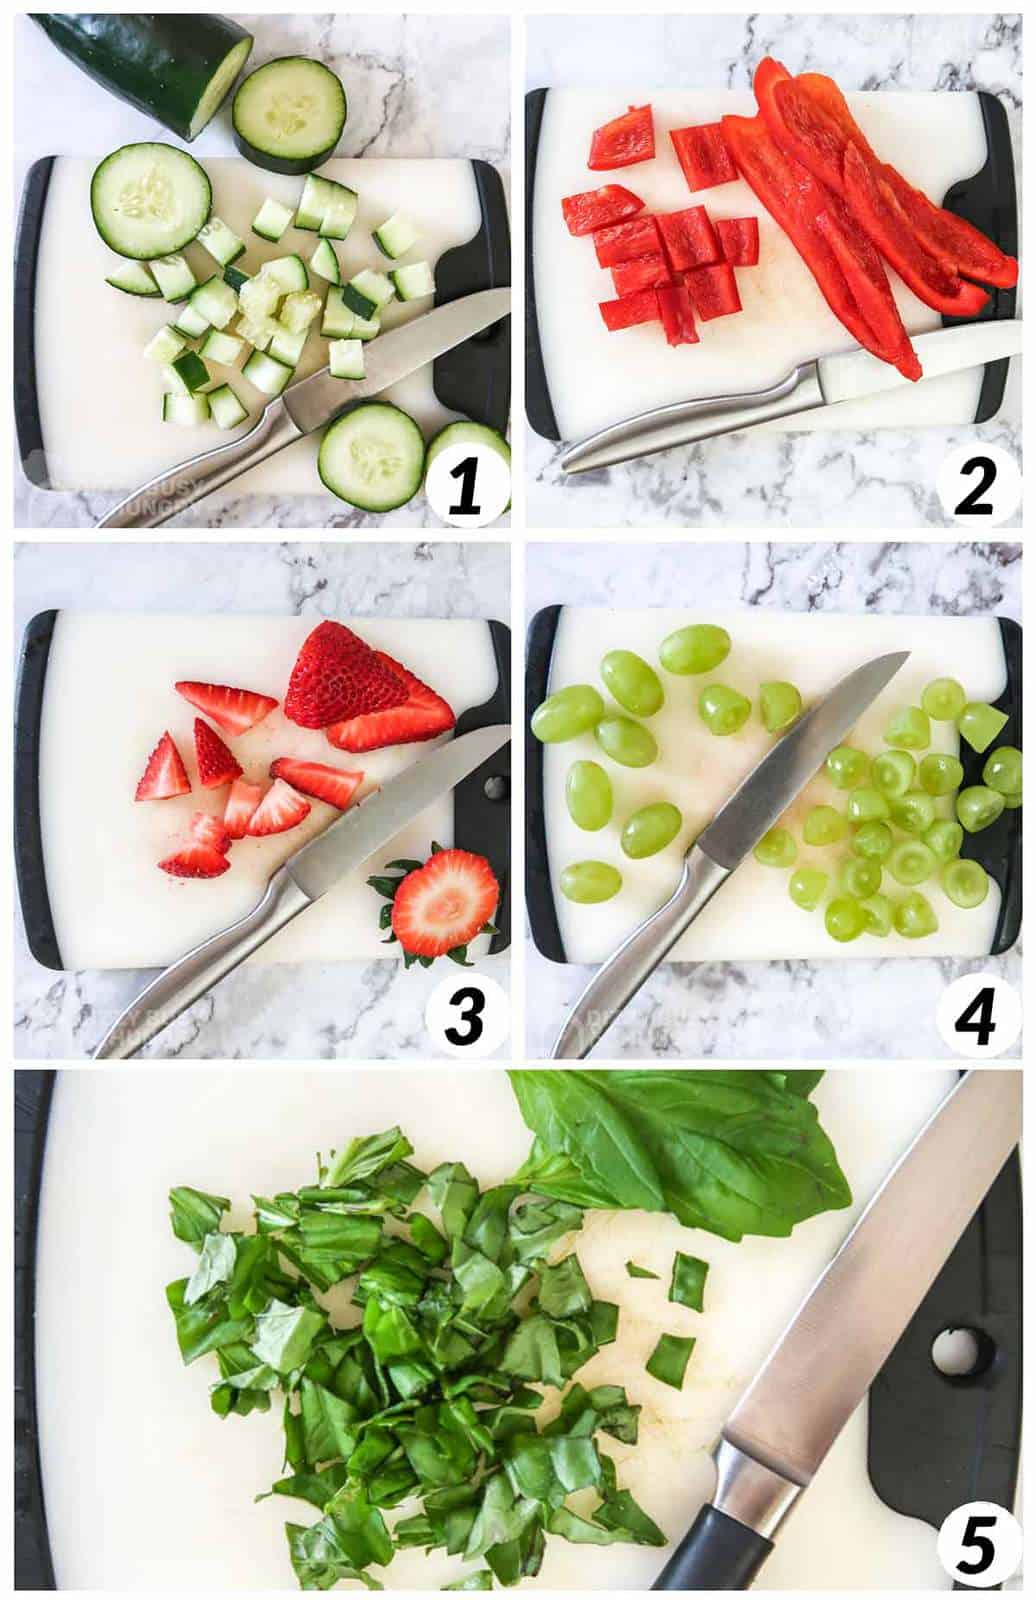 Five photos in a grid showing how to chop each of the ingredients for this salad recipe.